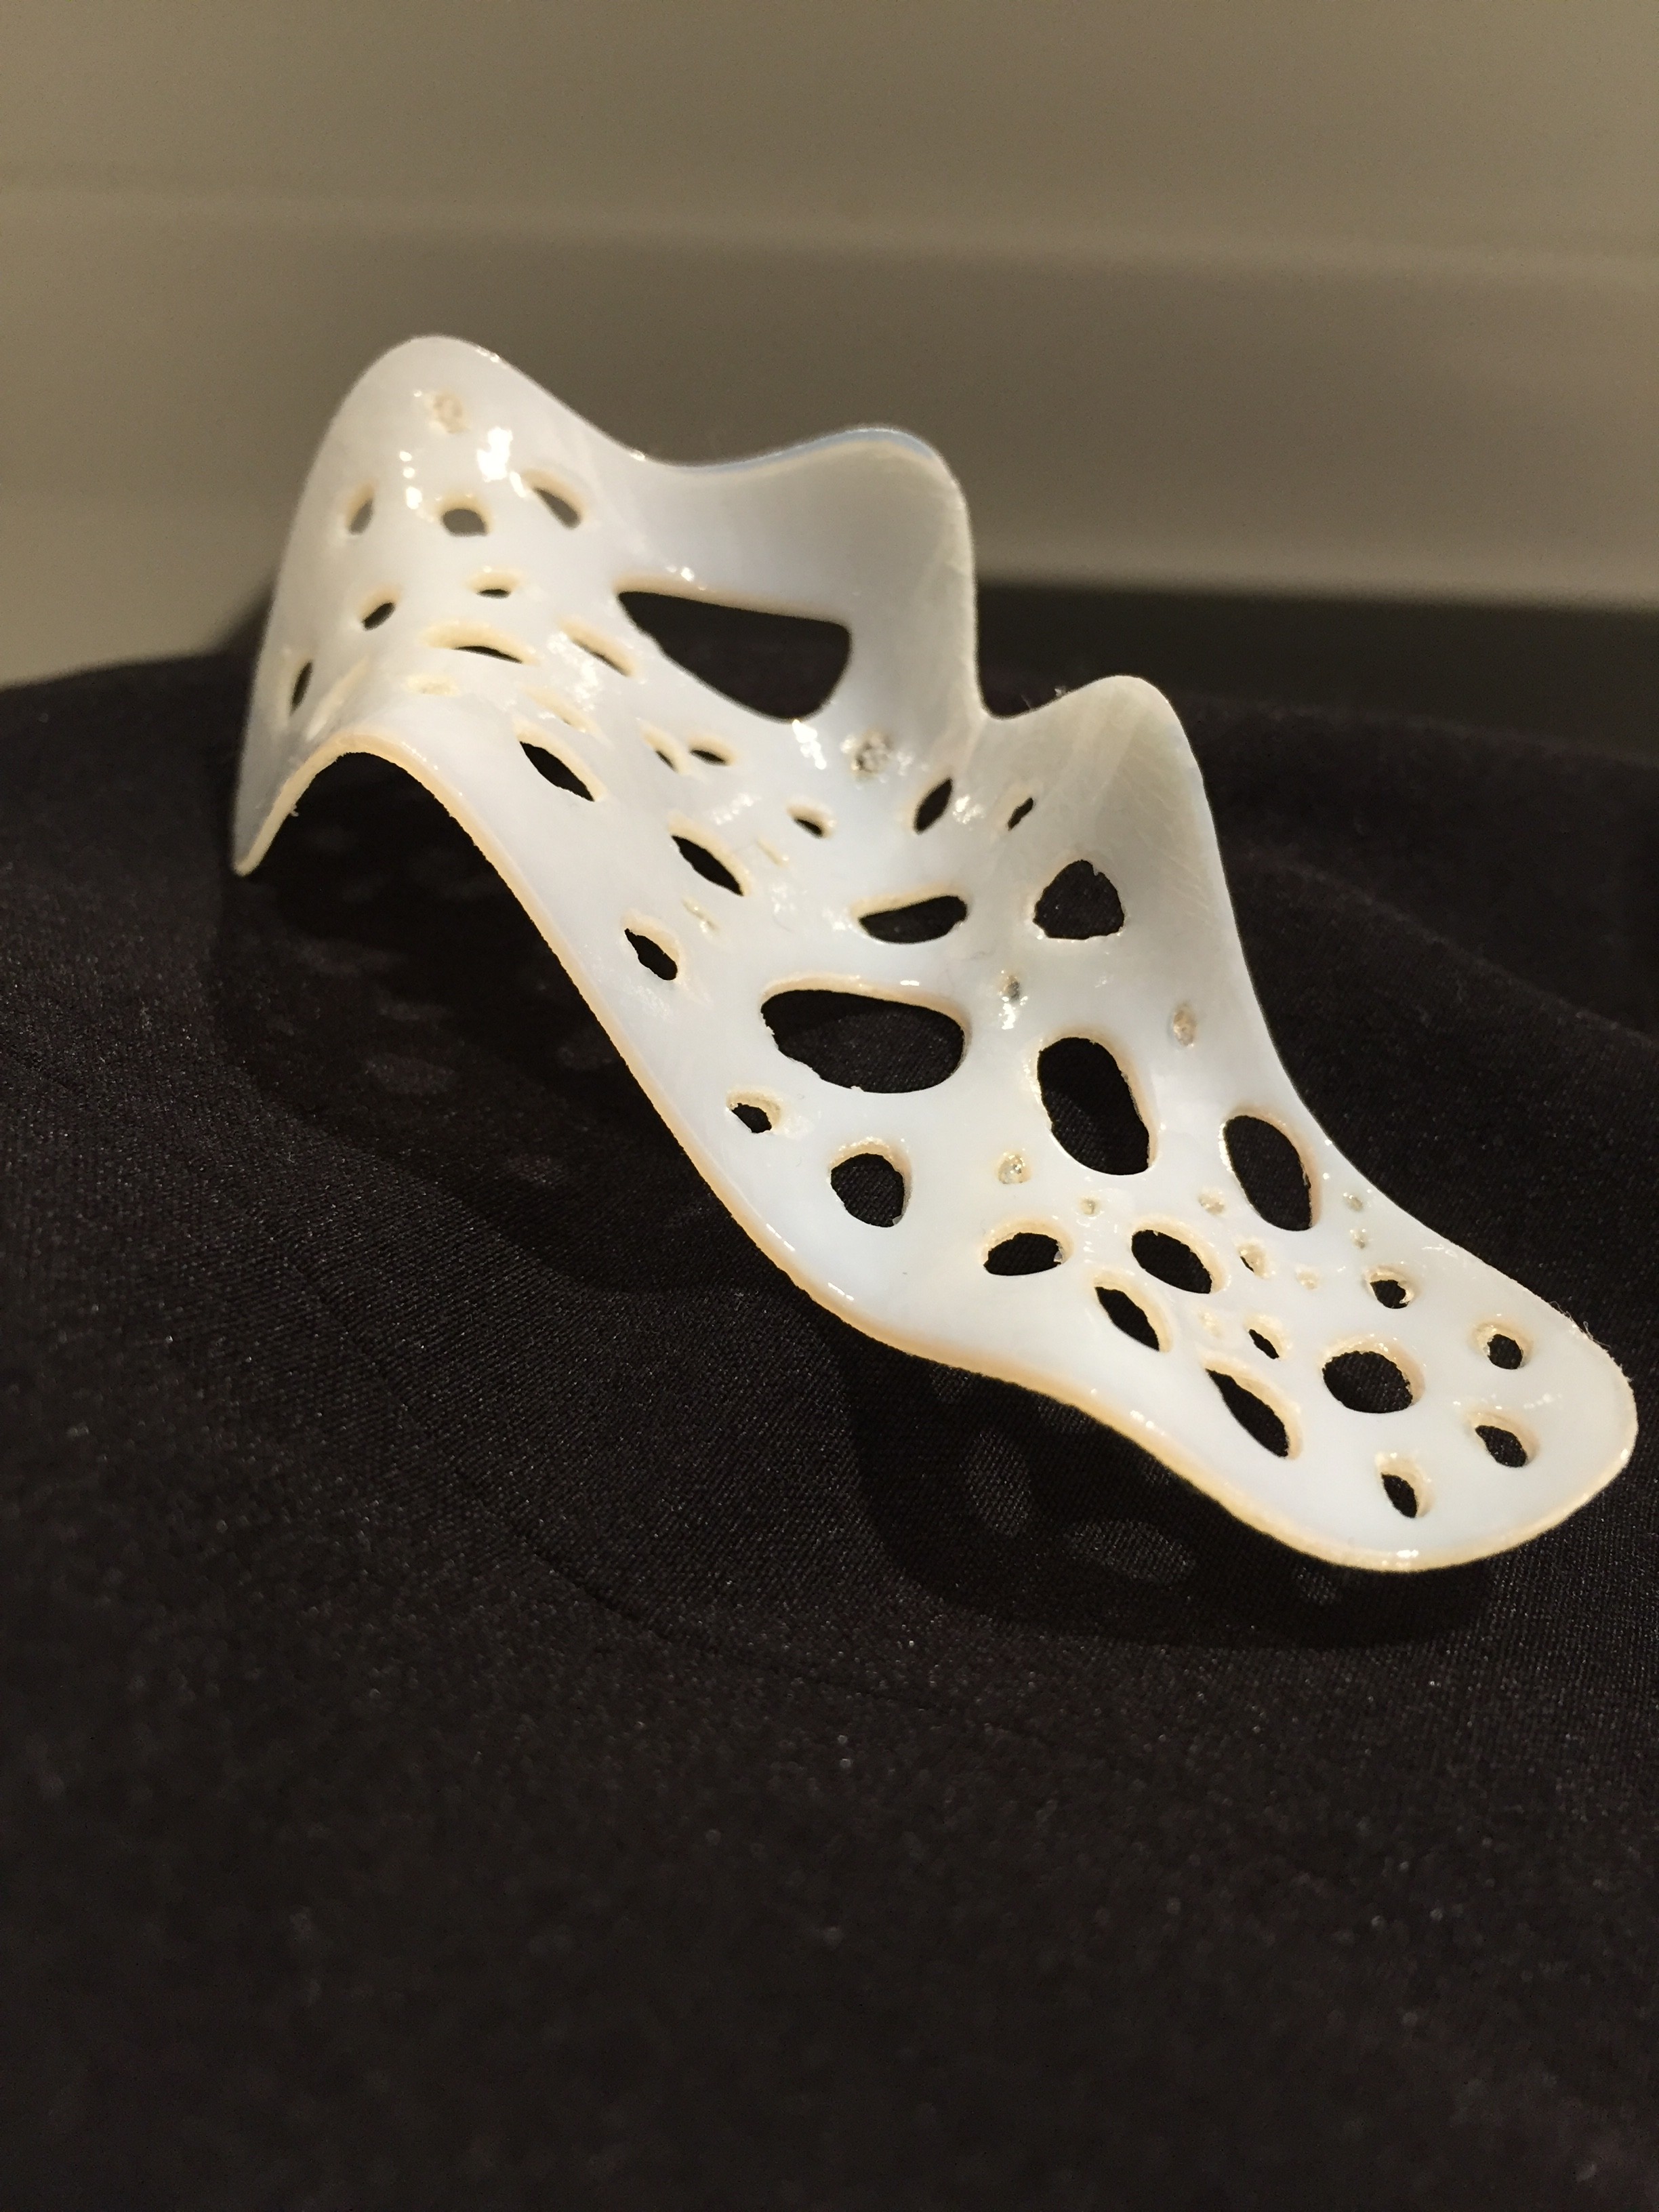 Minimal Surface 3D Print – Space + Materiality